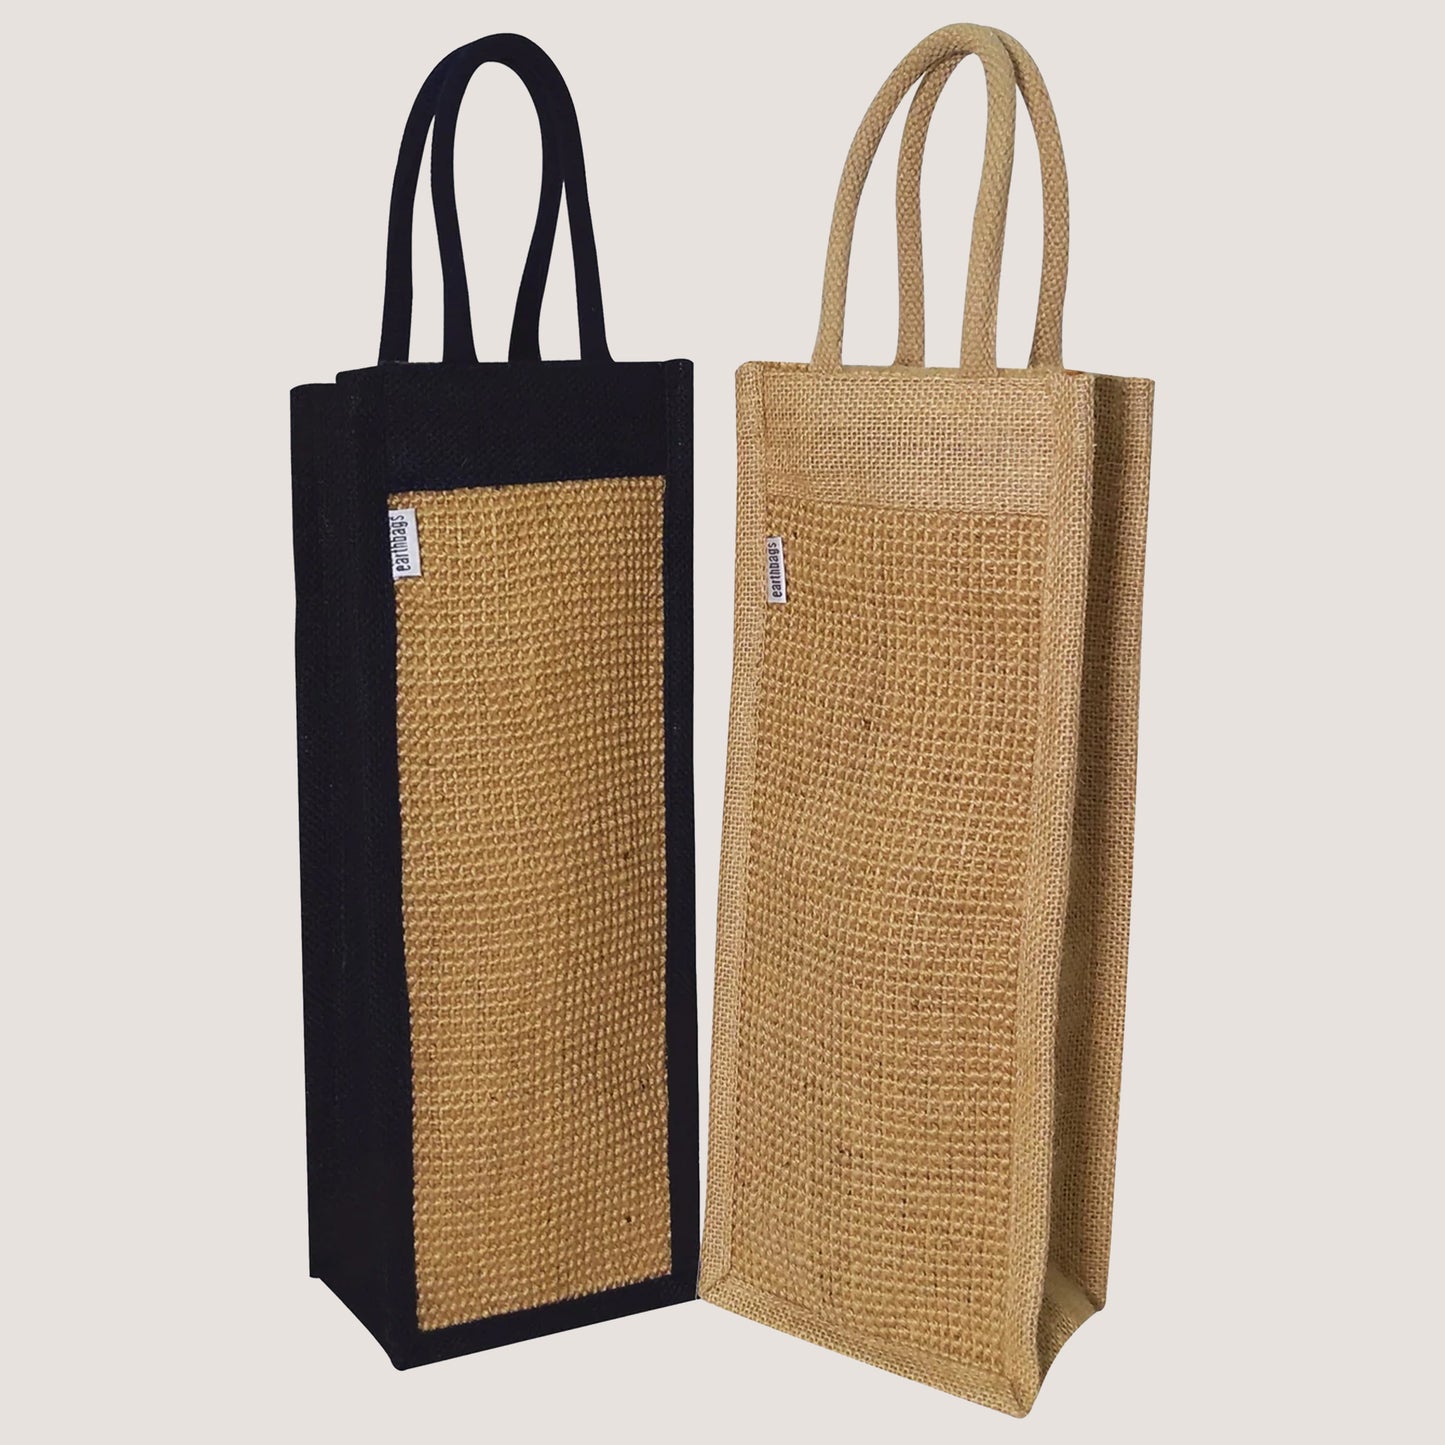 EARTHBAGS CLASSIC BOTTLE BAG IN NAVY BLUE AND BEIGE - PACK OF 2